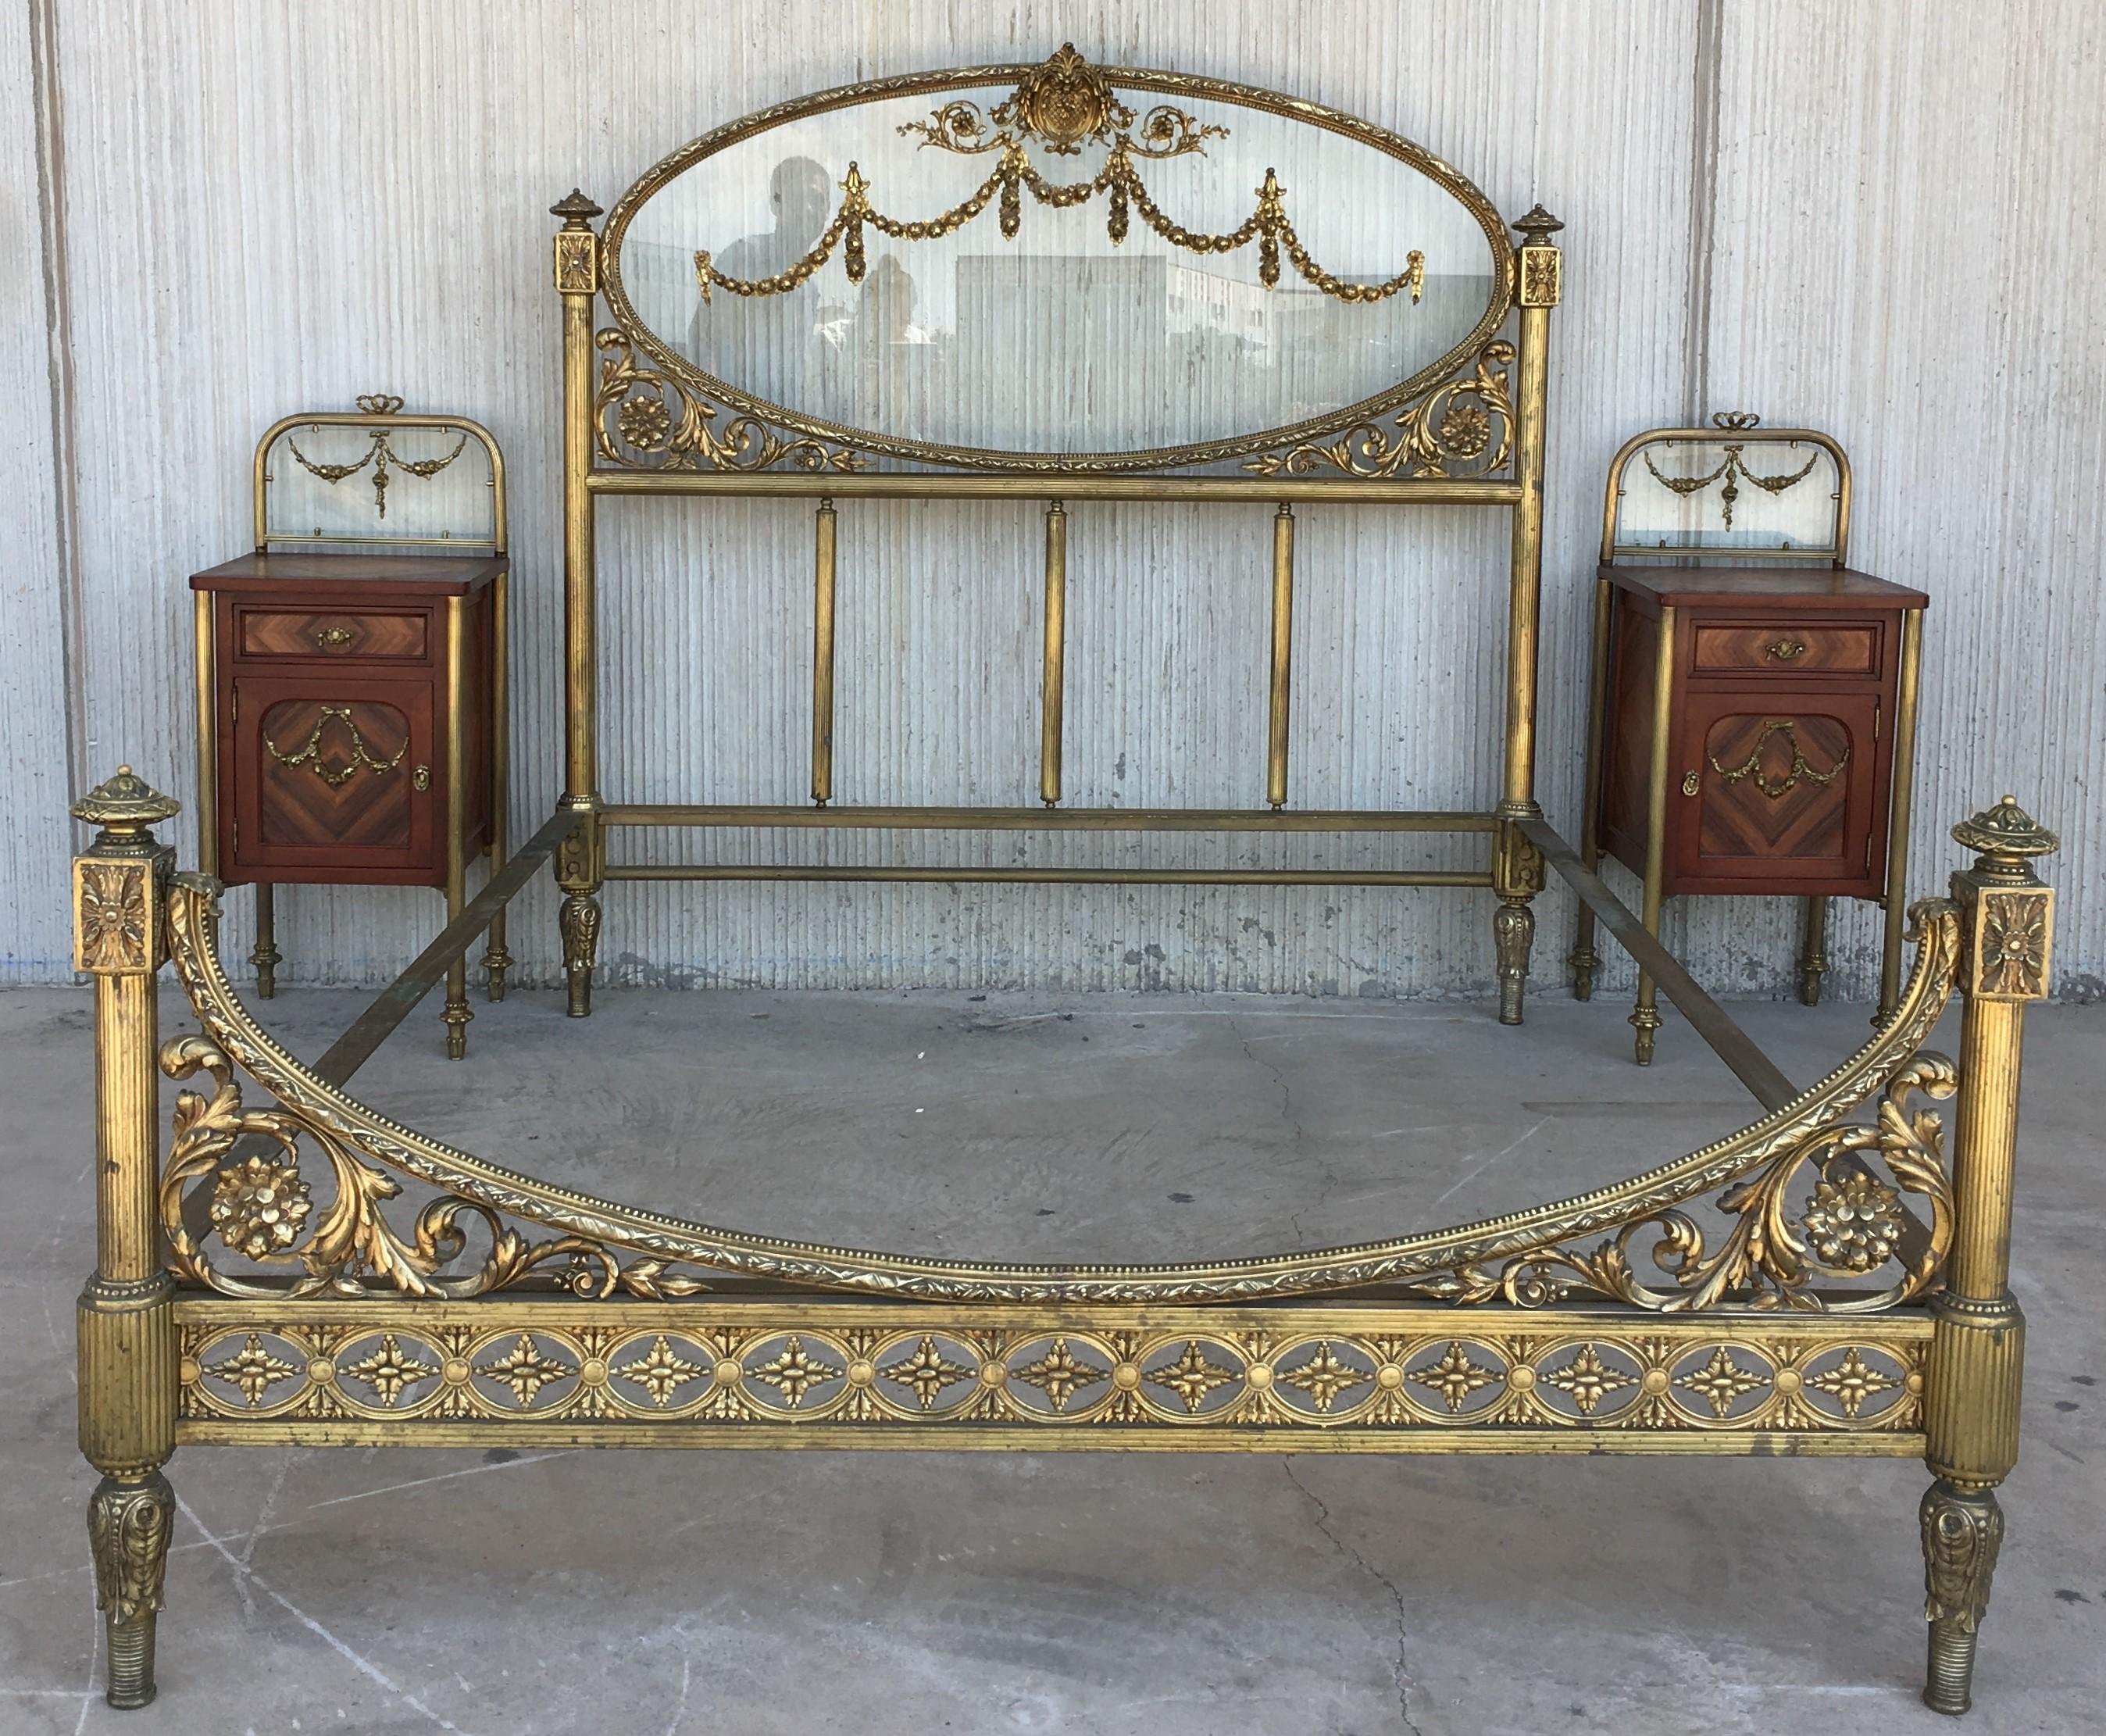 Beautiful and impressive 19th century full bedroom set
French Belle Époque bronze, iron, brass and glass in the headboard and nightstands

You can change the bed slats for adapt it a queen bed.